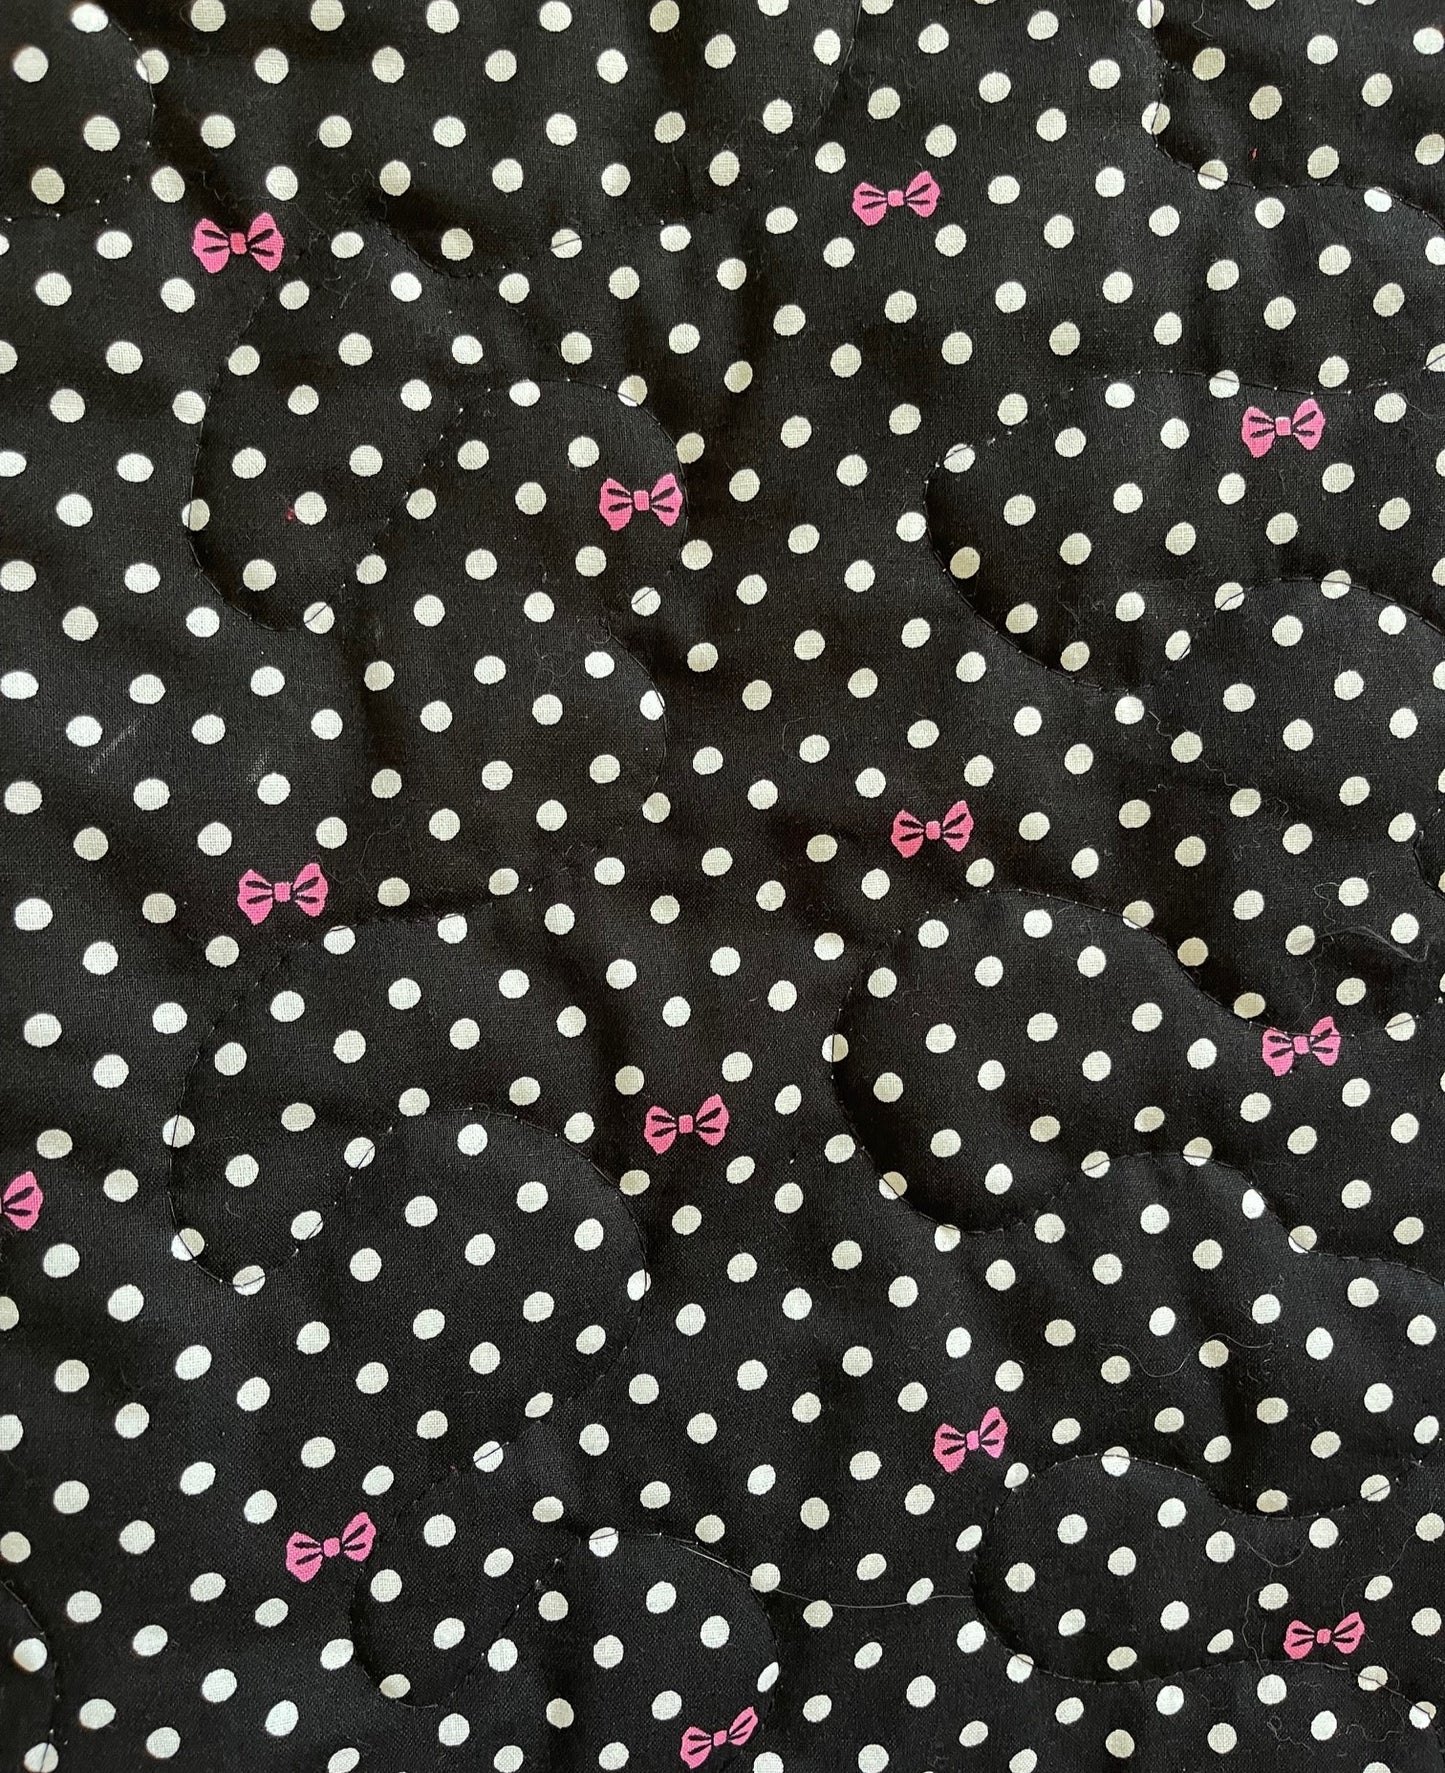 MINNIE MOUSE "IT'S ALL ABOUT MINNIE" Inspired Pink Black White Quilted Blanket